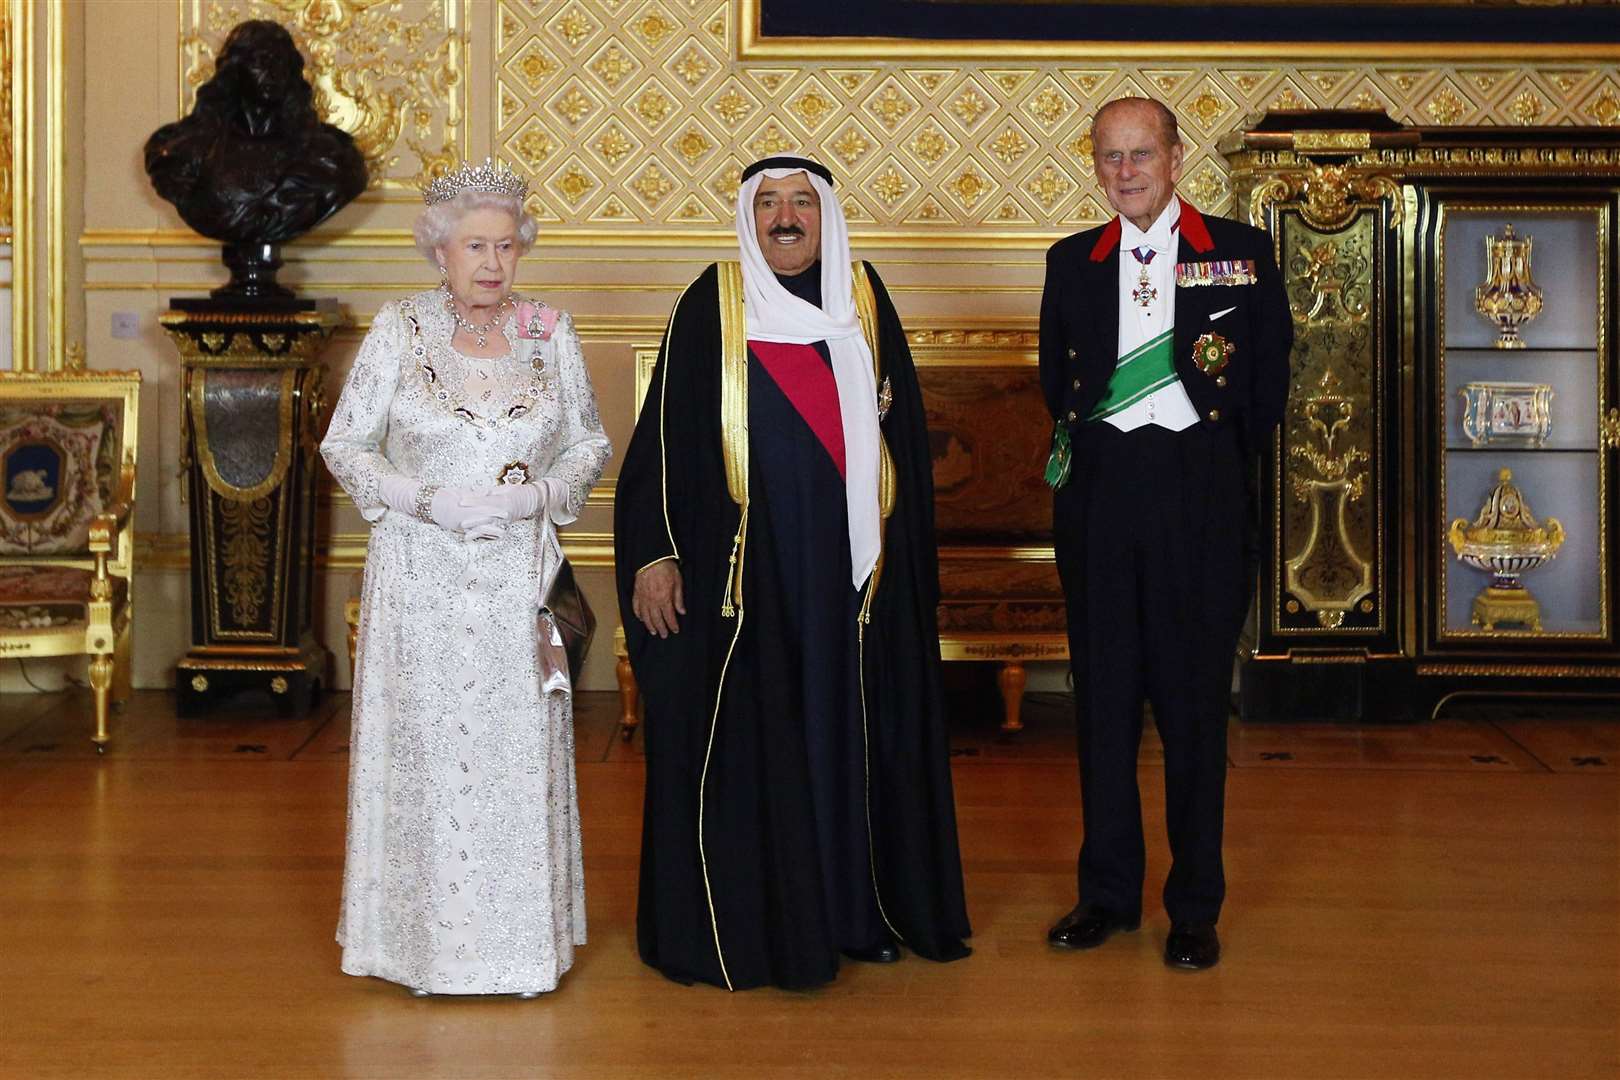 Sheikh Sabah Al Ahmad Al Jaber Al Sabah with the Queen and the Duke of Edinburgh ahead of a state banquet at Windsor Castle (Oli Scarff/PA)